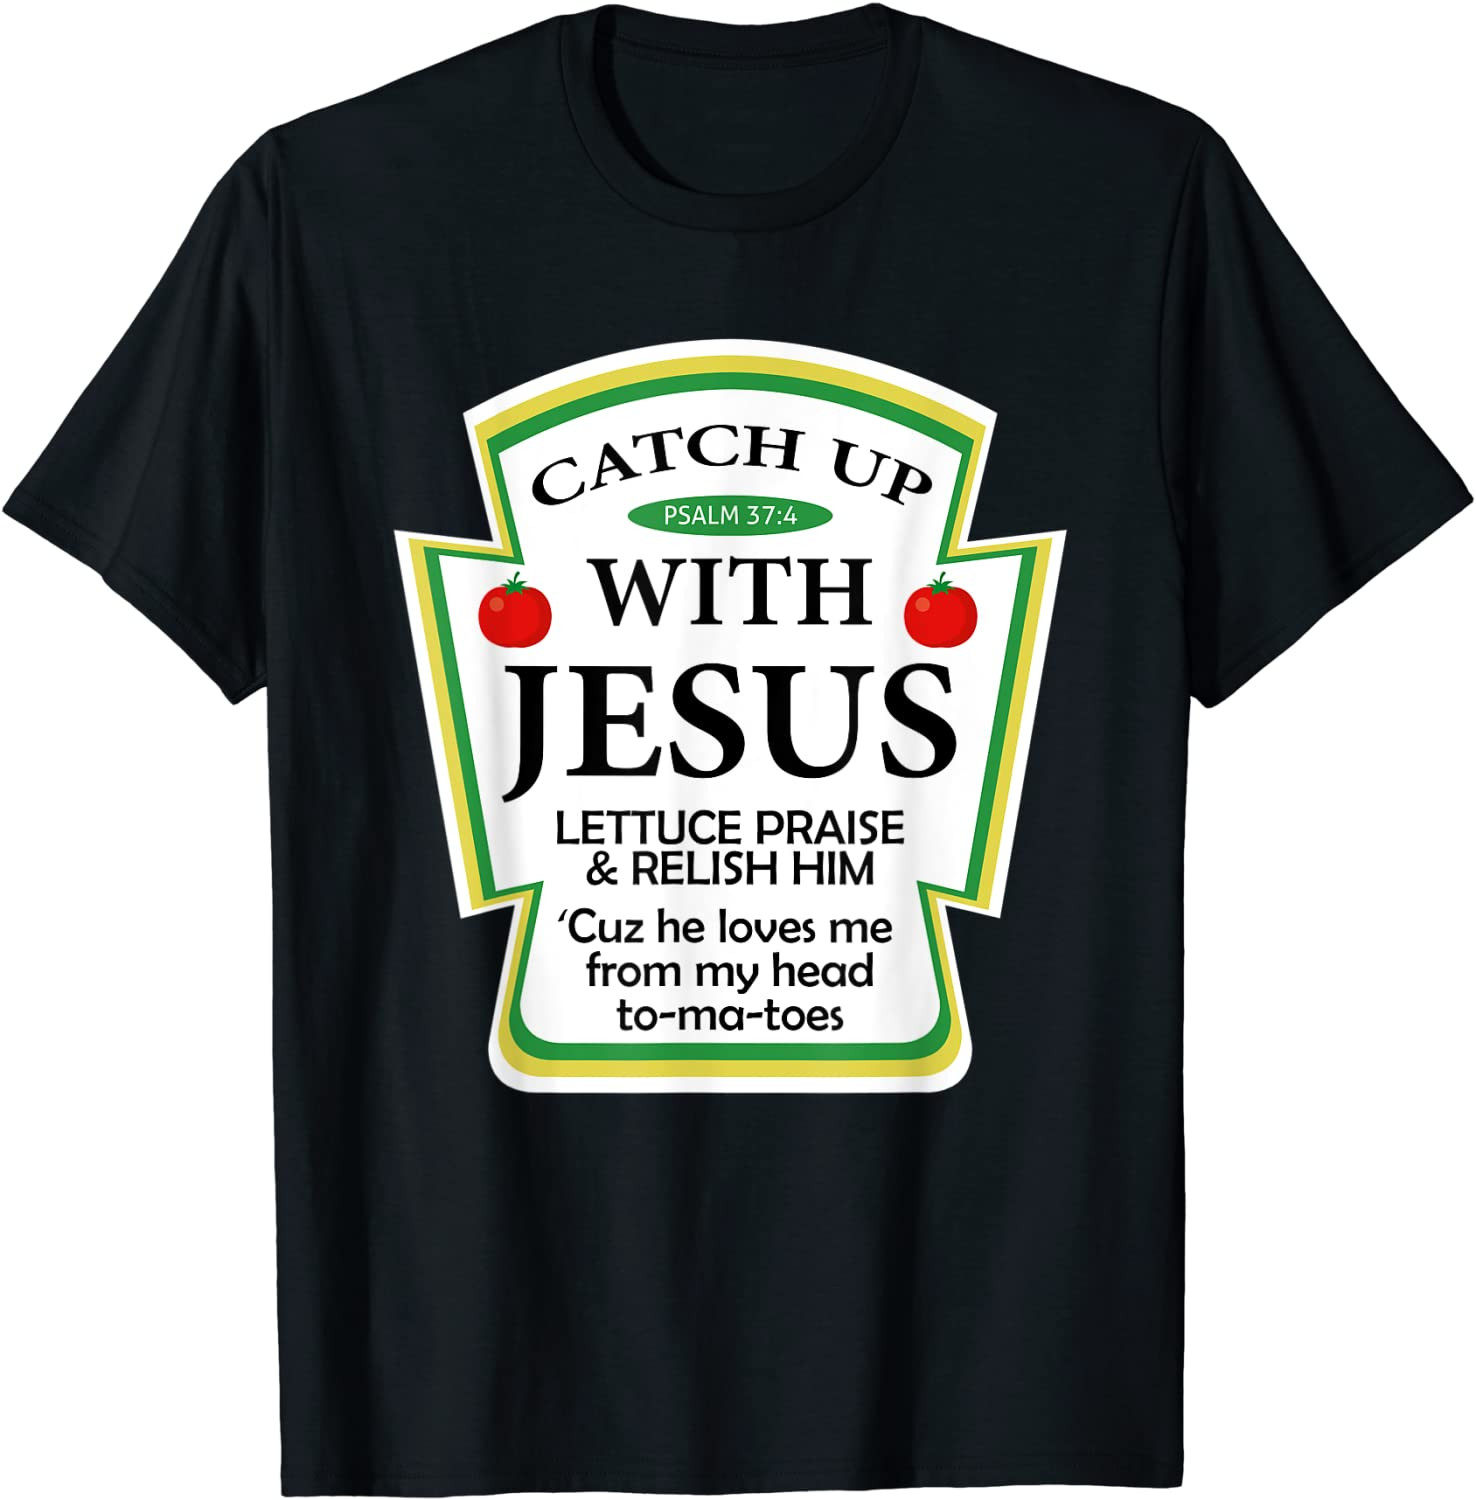 Catch Up With Jesus Ketchup T-Shirt